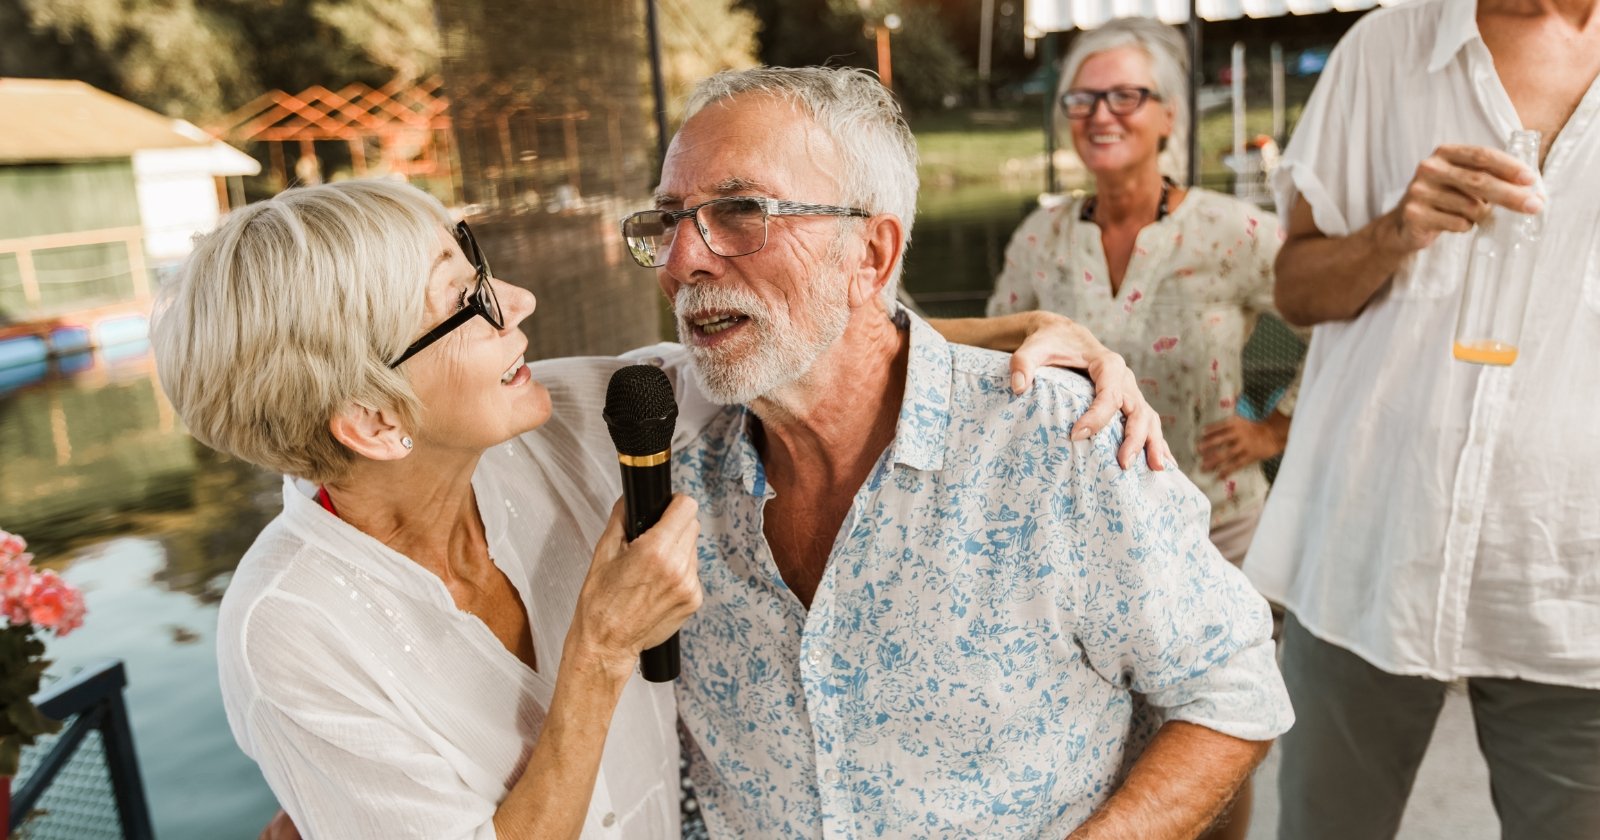 The photo shows seniors with a microphone participating in an event.